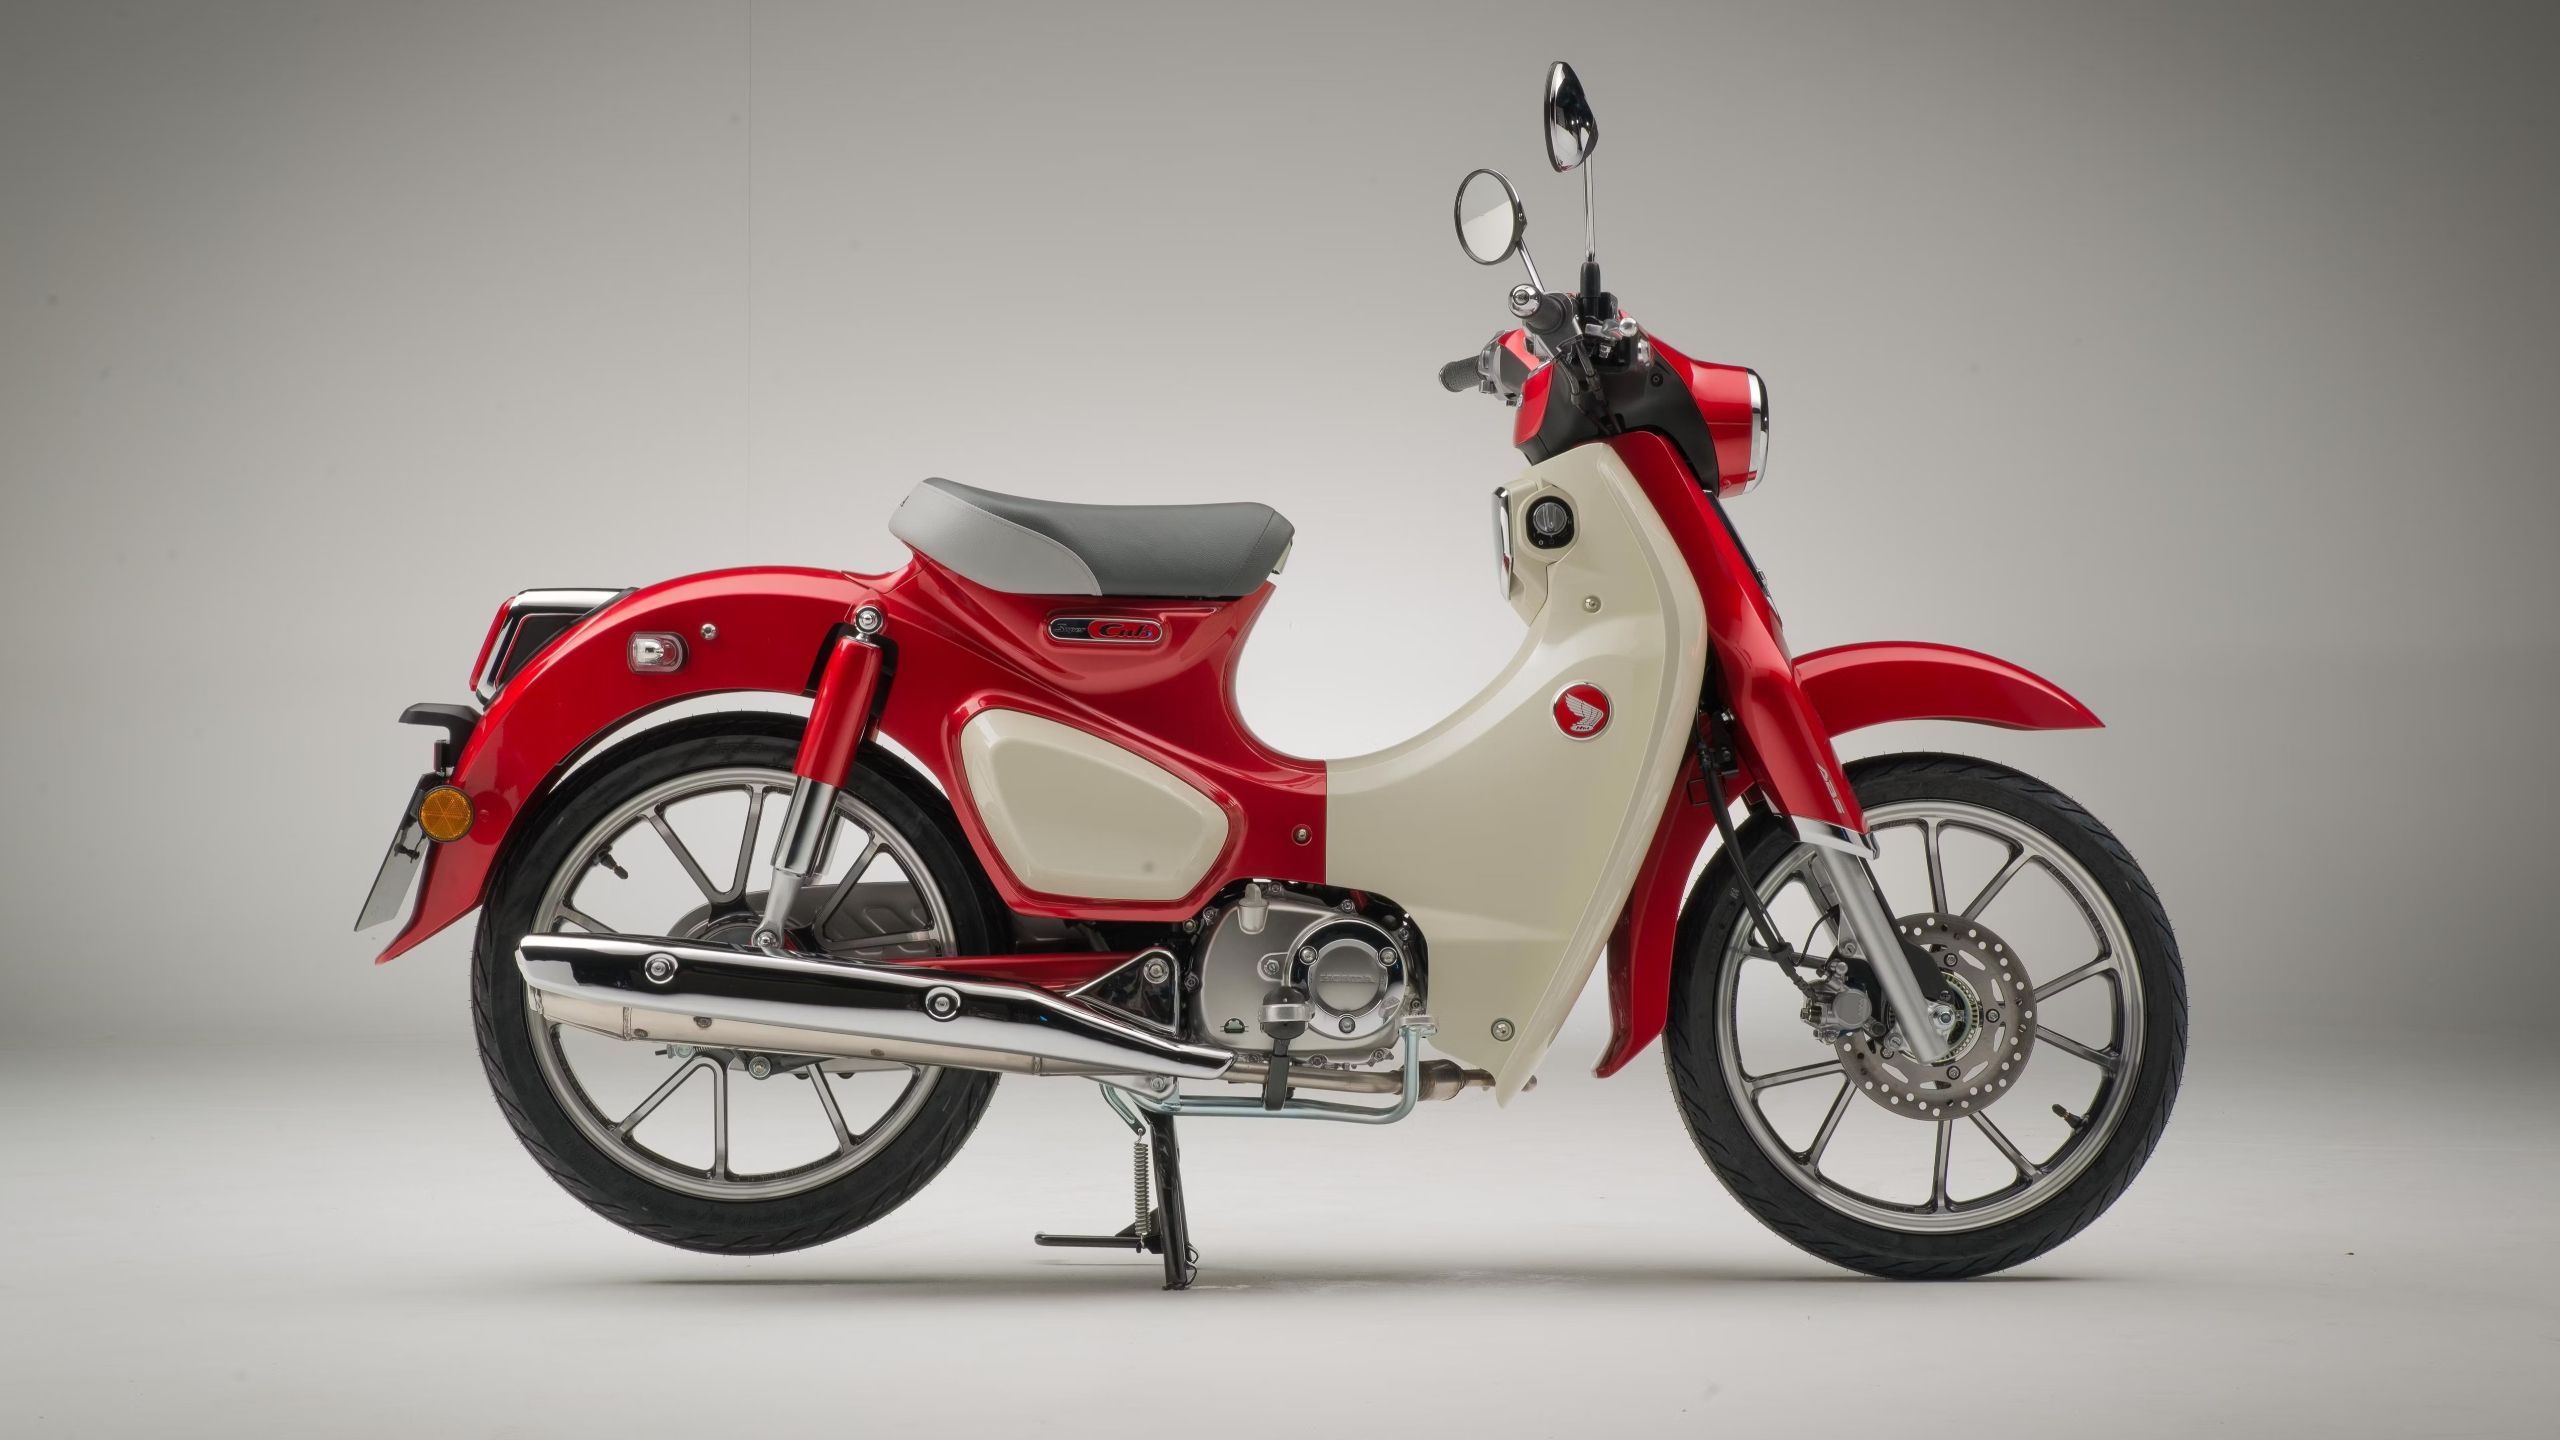 New Honda 50cc Scooters Debut With Updated Features, Colours